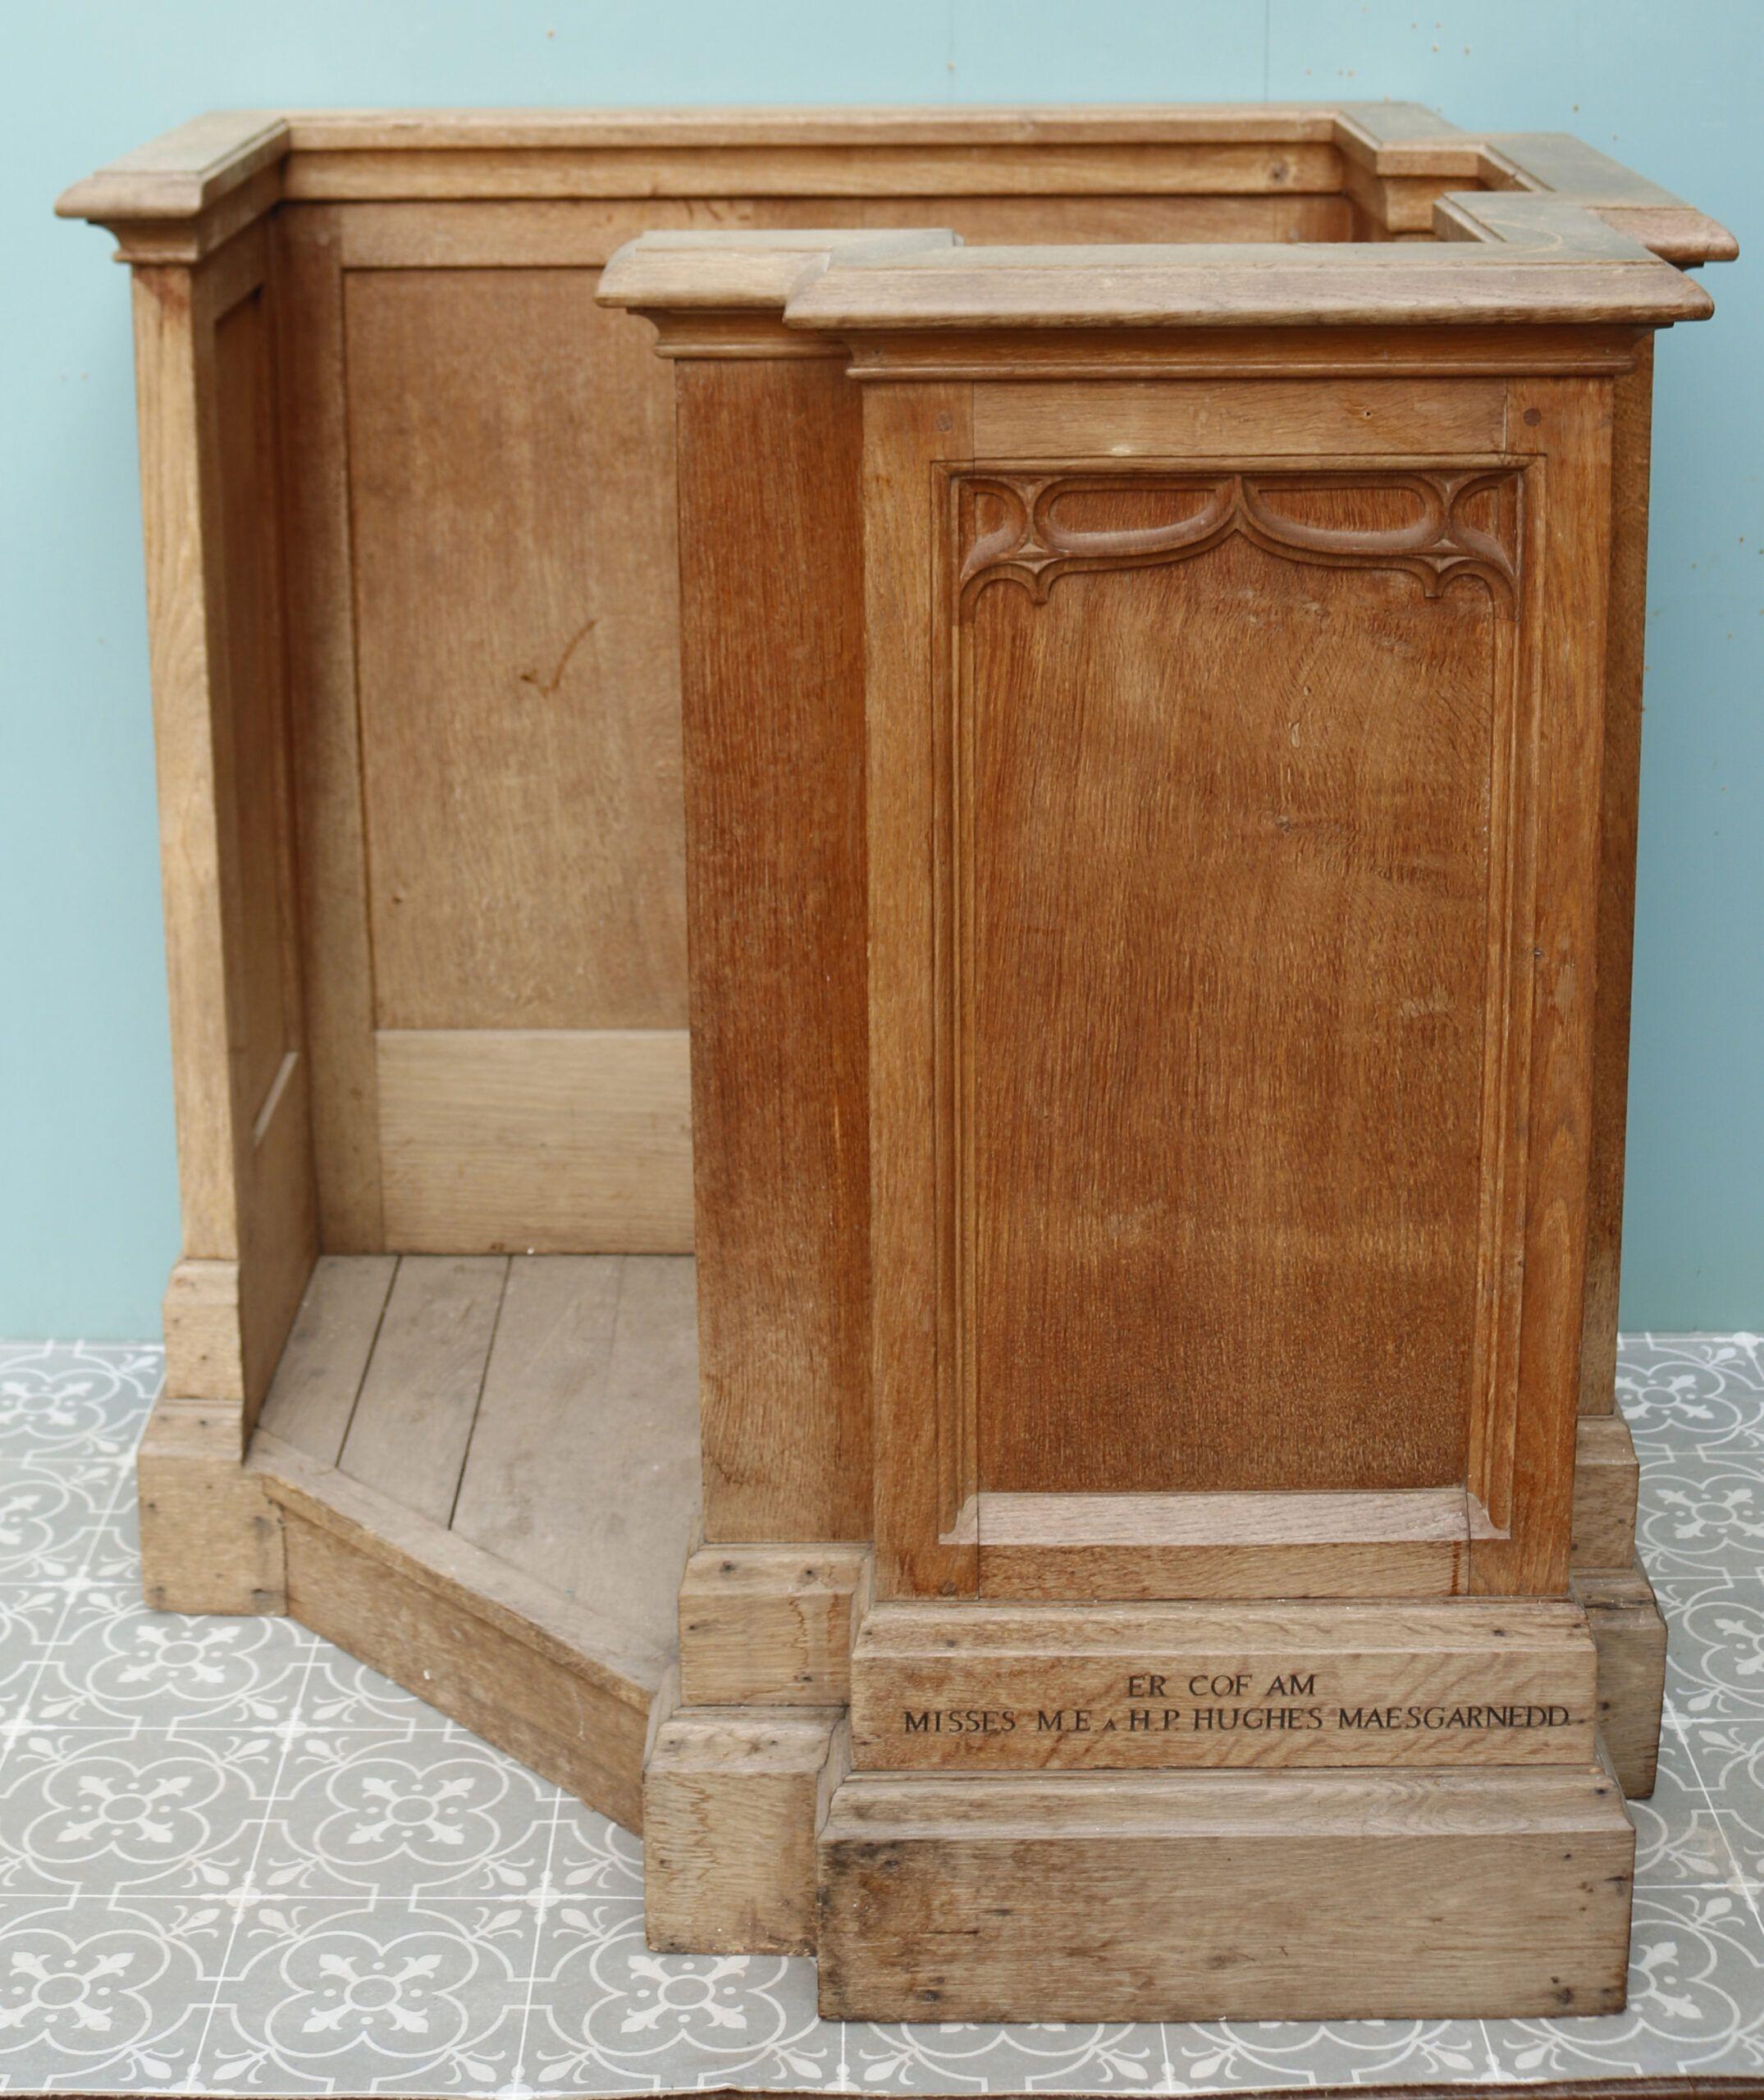 Robert ‘Mouseman’ Thompson oak pulpit. A beautiful Robert ‘Mouseman’ Thompson, solid oak pulpit. The oak is in panelled form with the carved Mouse signature and can be used in a variety of settings. These can be used as stylish work stations or a